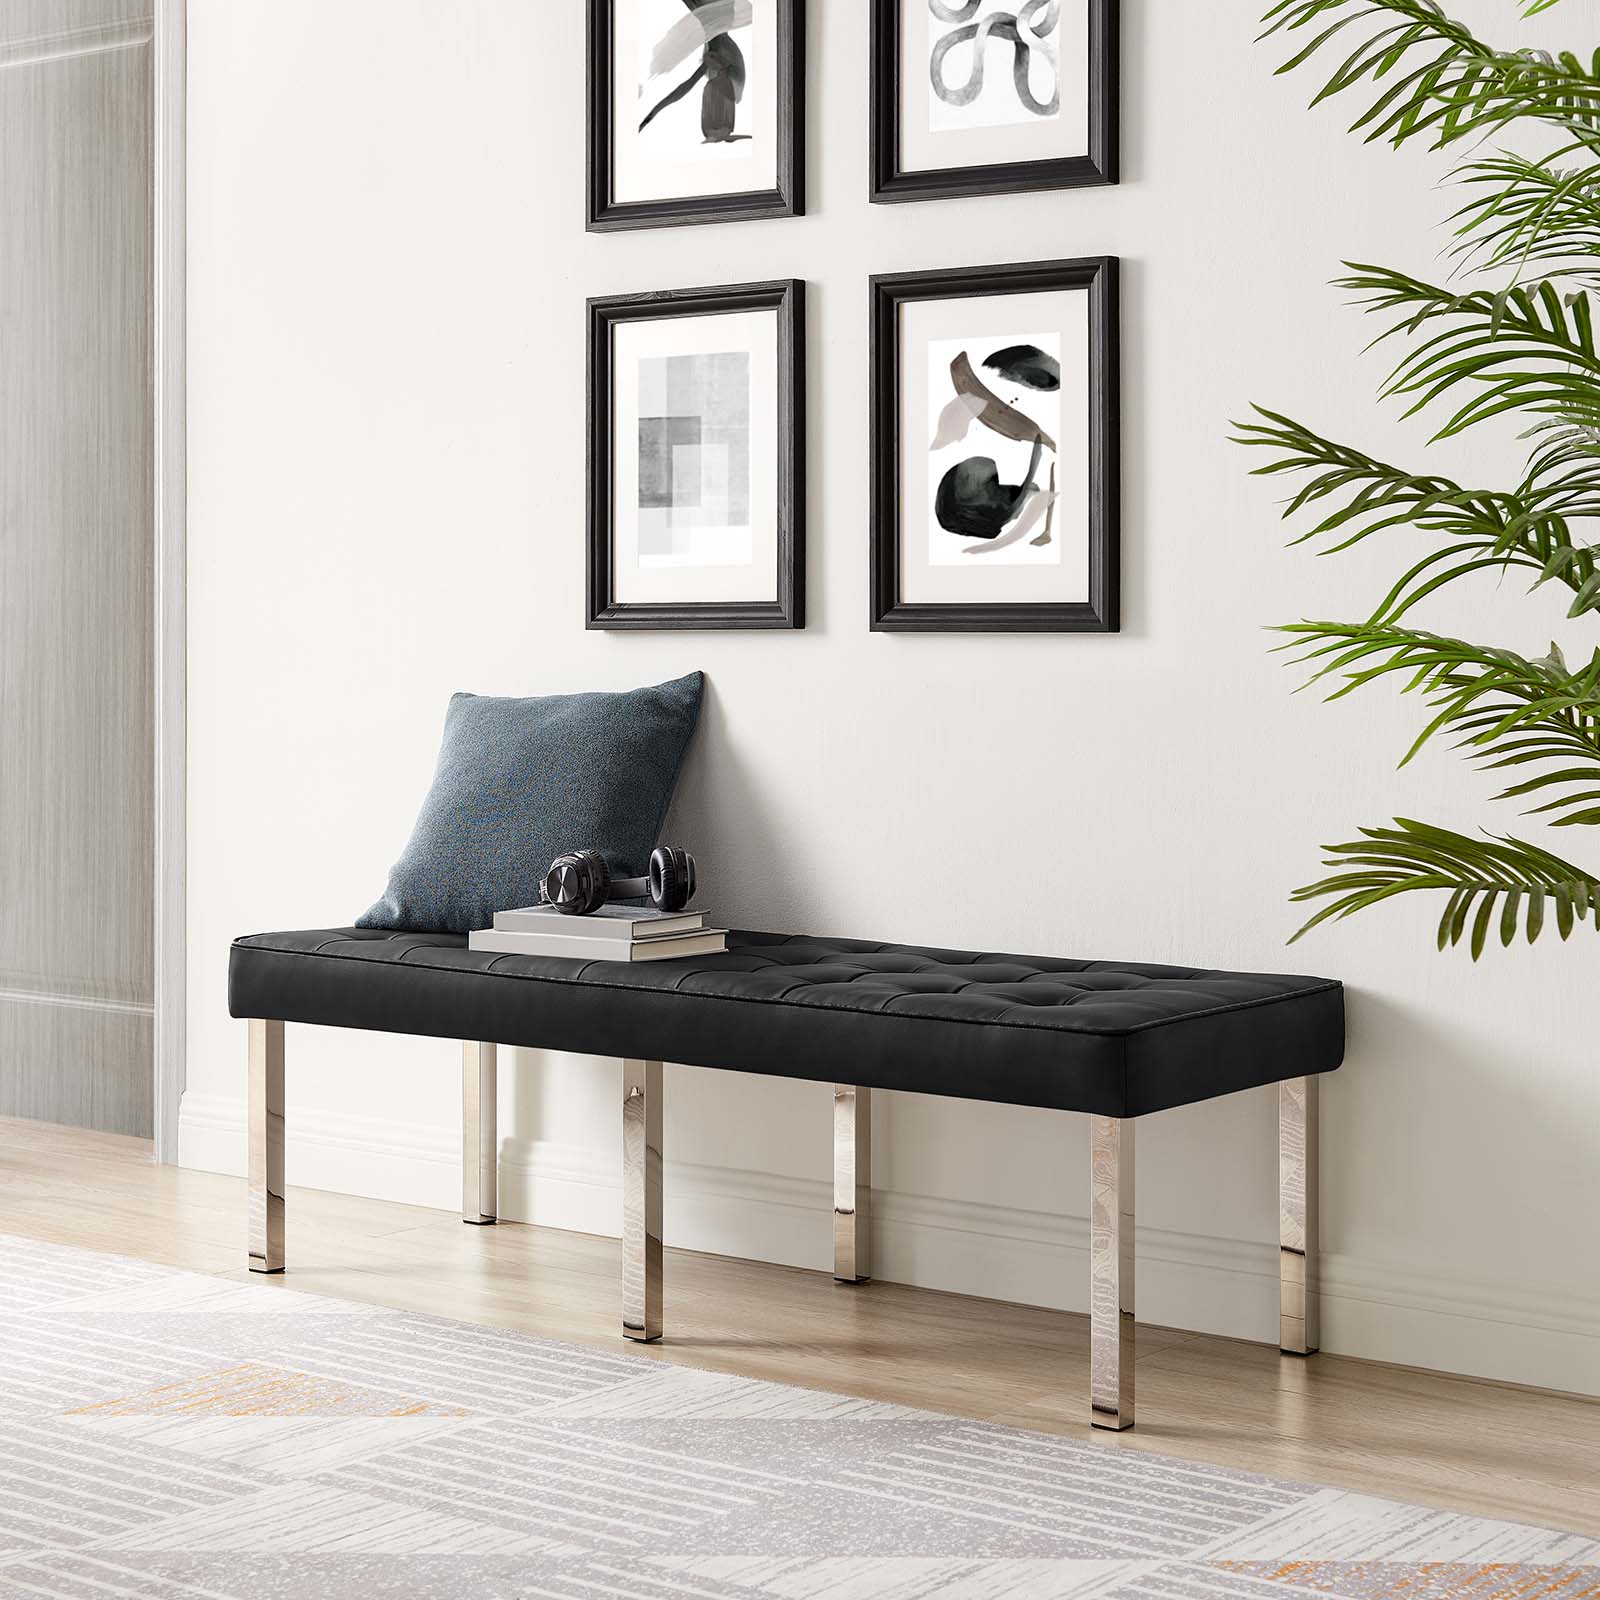 Modway Benches - Loft Tufted Large Upholstered Faux Leather Bench Silver Black